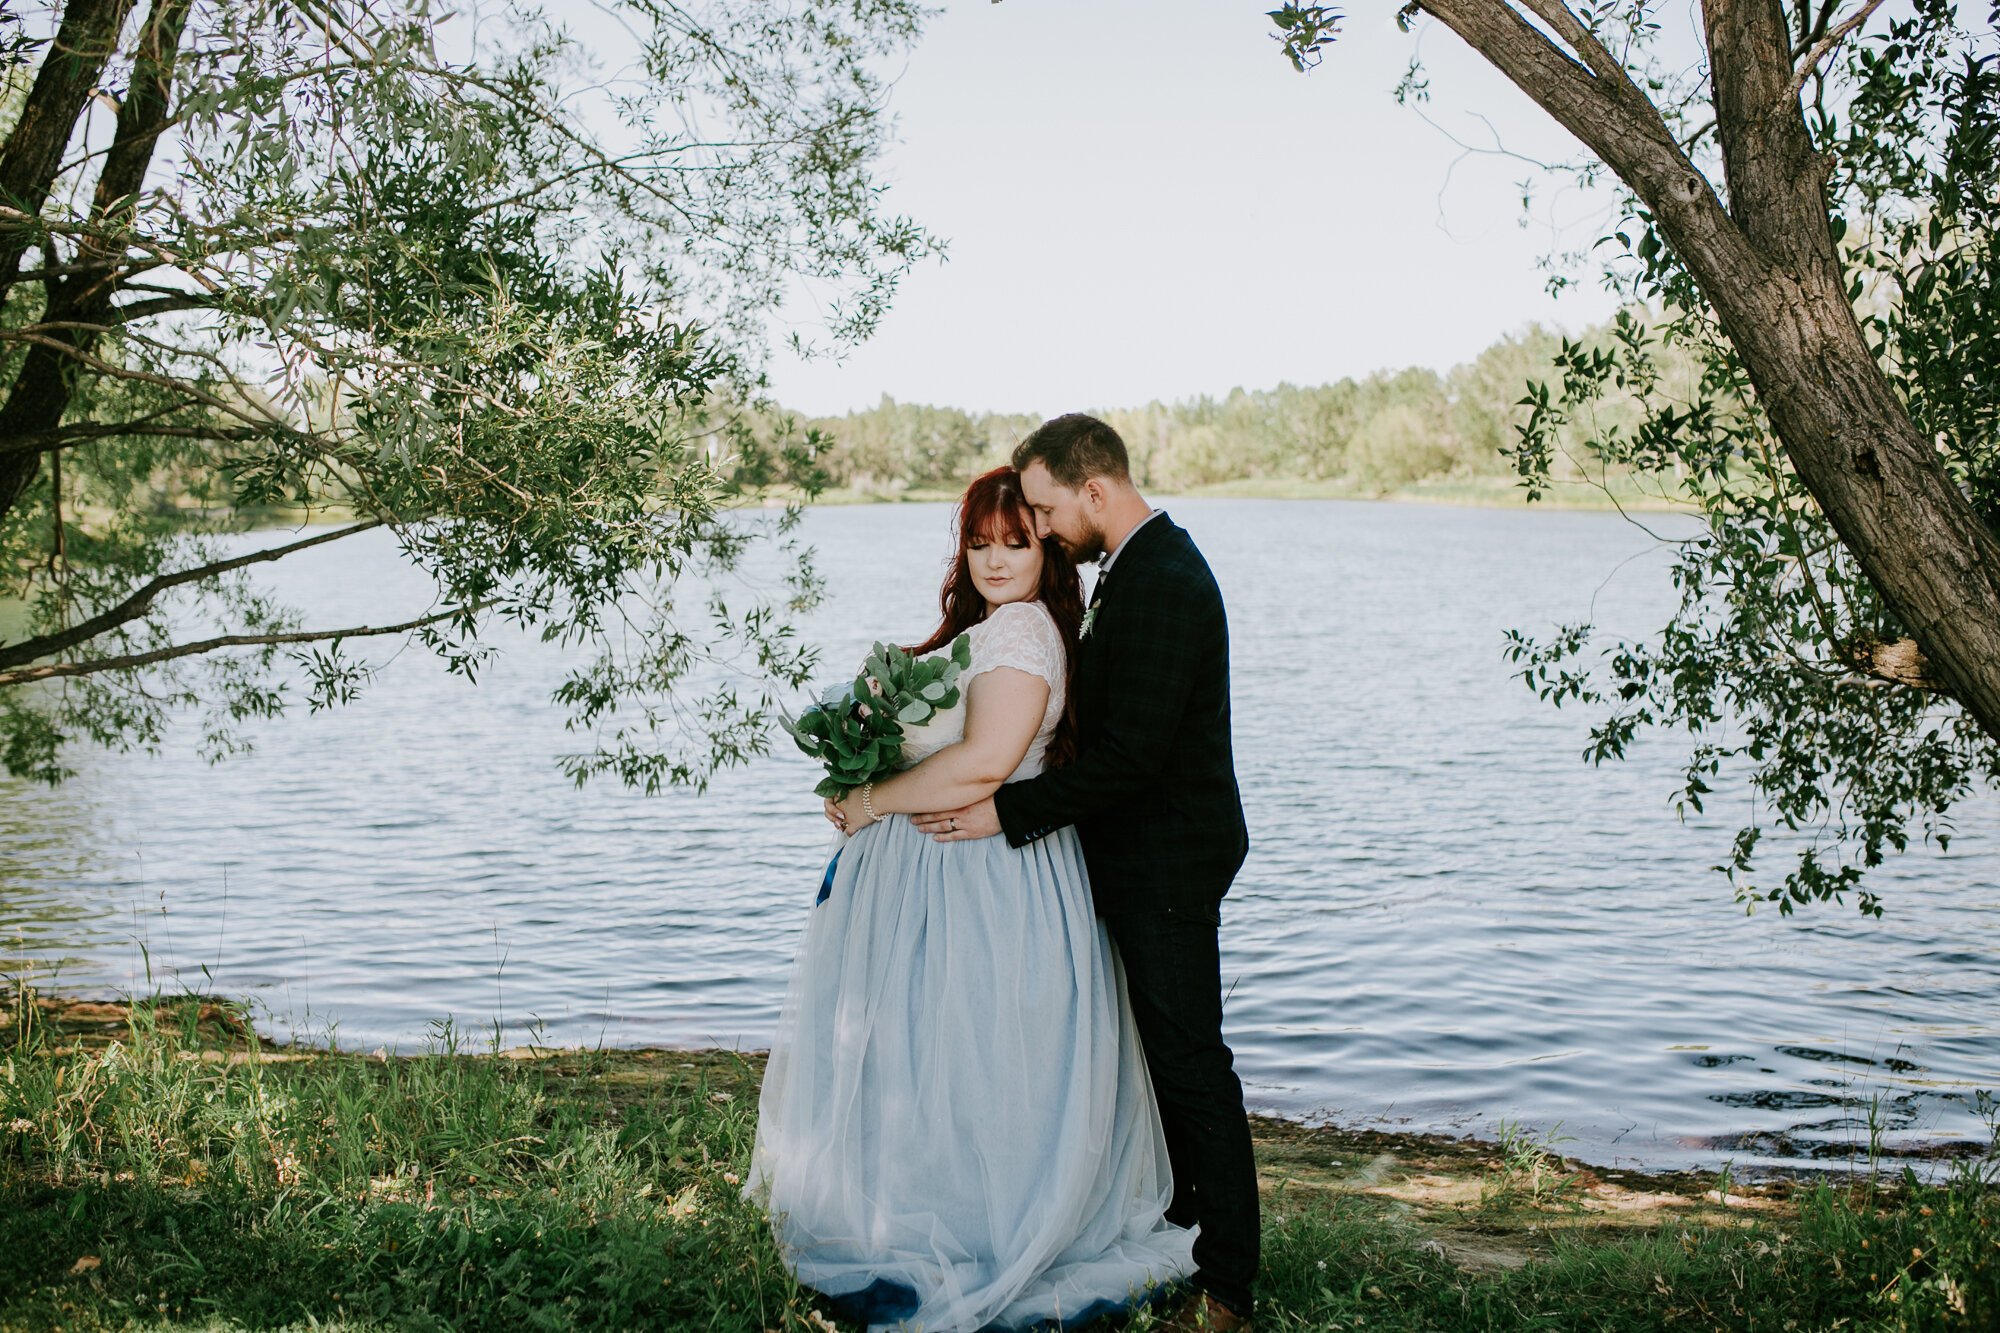  I chose this photo from C+C’s wedding day at Carburn Park as it was one of the last photos we got from the day.  I love that in this moment, it feels like they’ve forgotten I’m even there (plus those tones in the water - obsessed).  